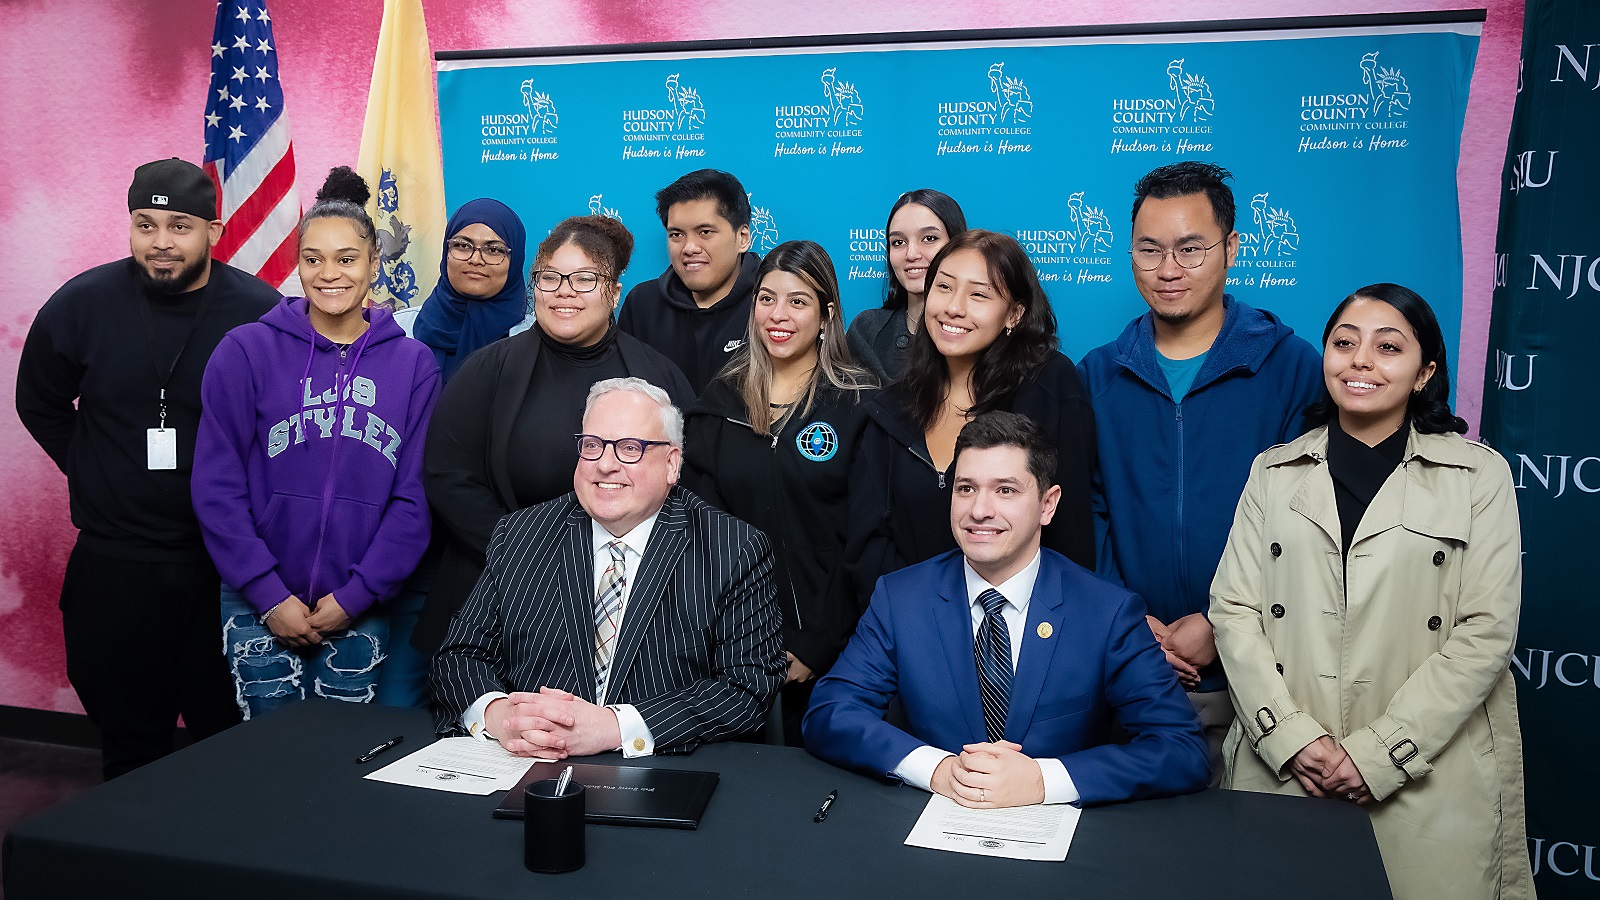 HCCC President Dr. Christopher Reber and NJCU President Andrés Acebo sign the HCCC|NJCU CONNECT Transfer Agreement, accompanied by students who will take part in the program.